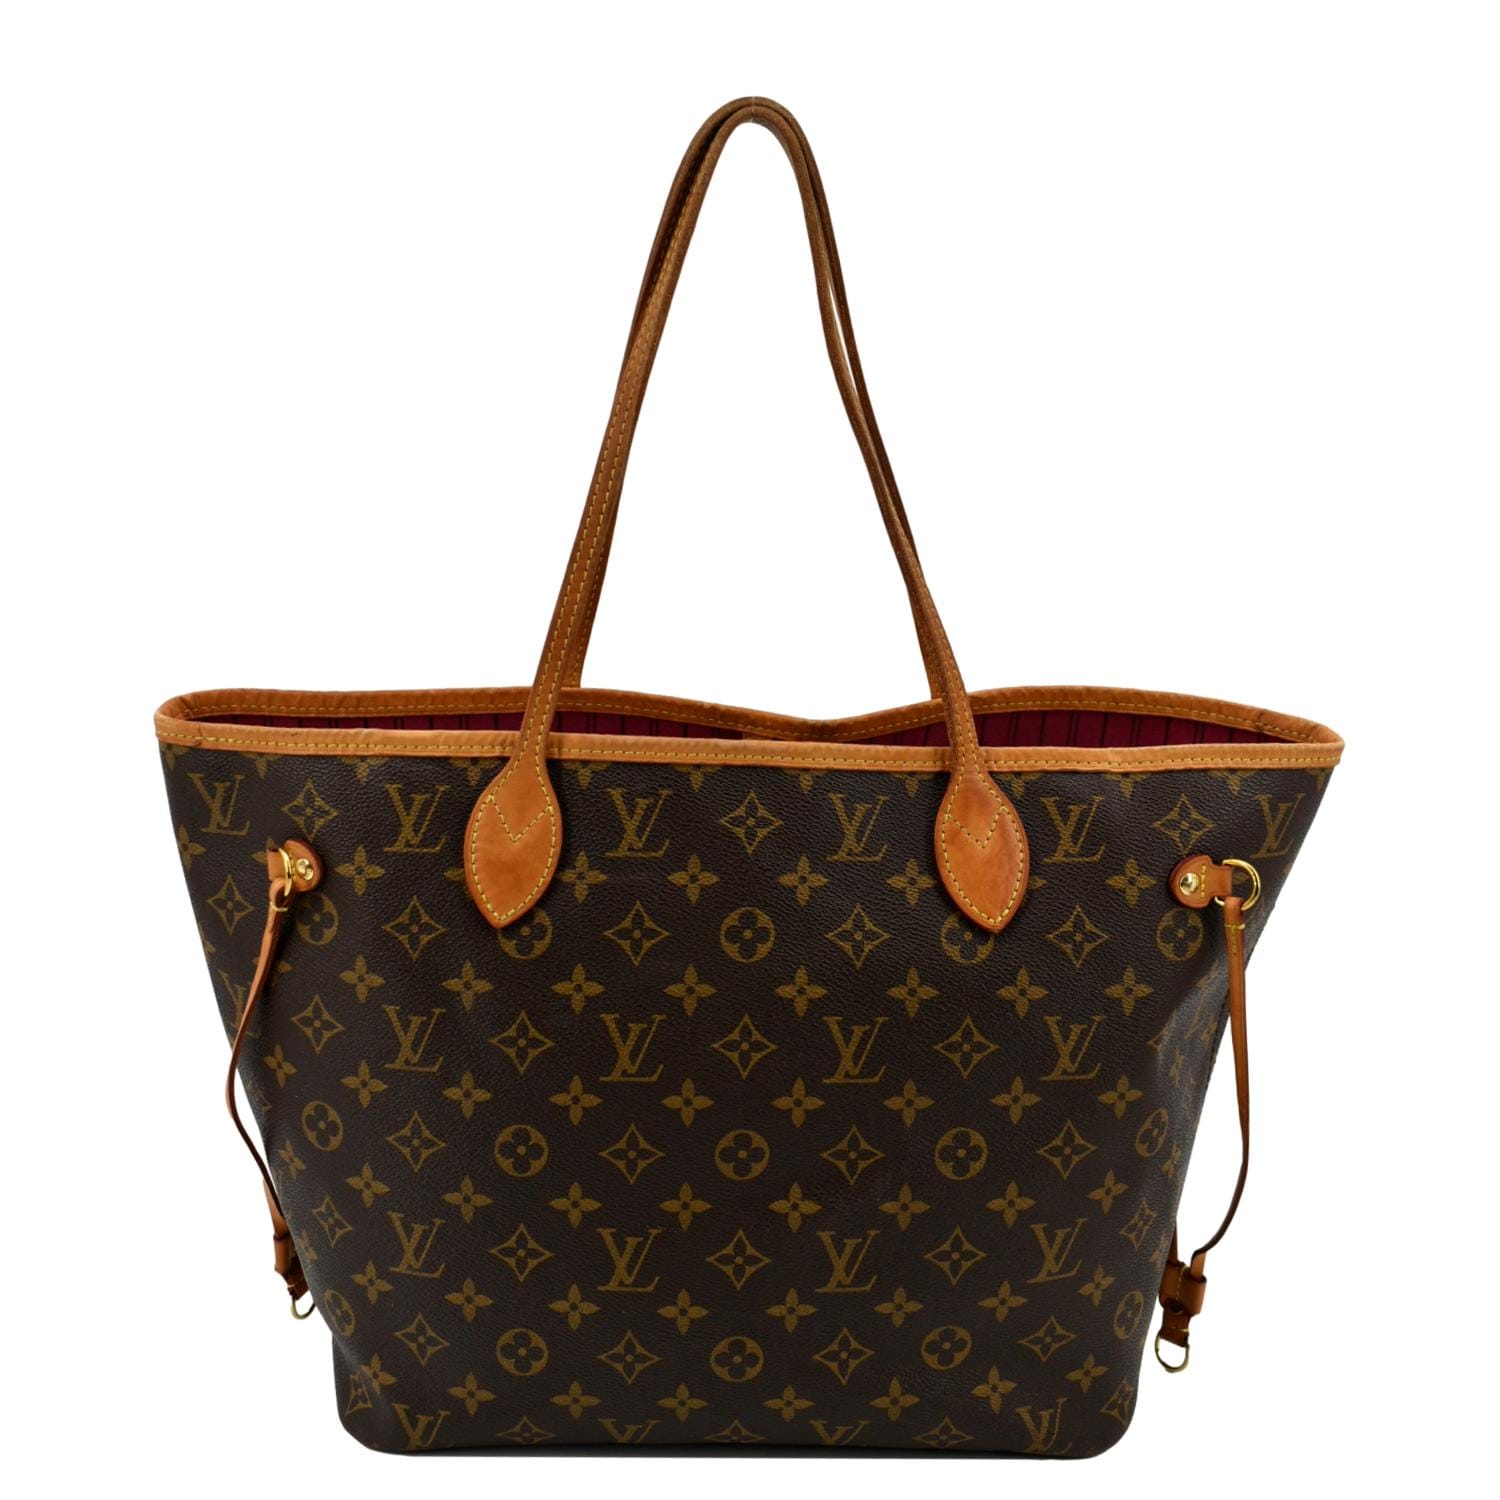 Buy Online Louis Vuitton-Neverfull MM Monogram-M40156 at Affordable Price